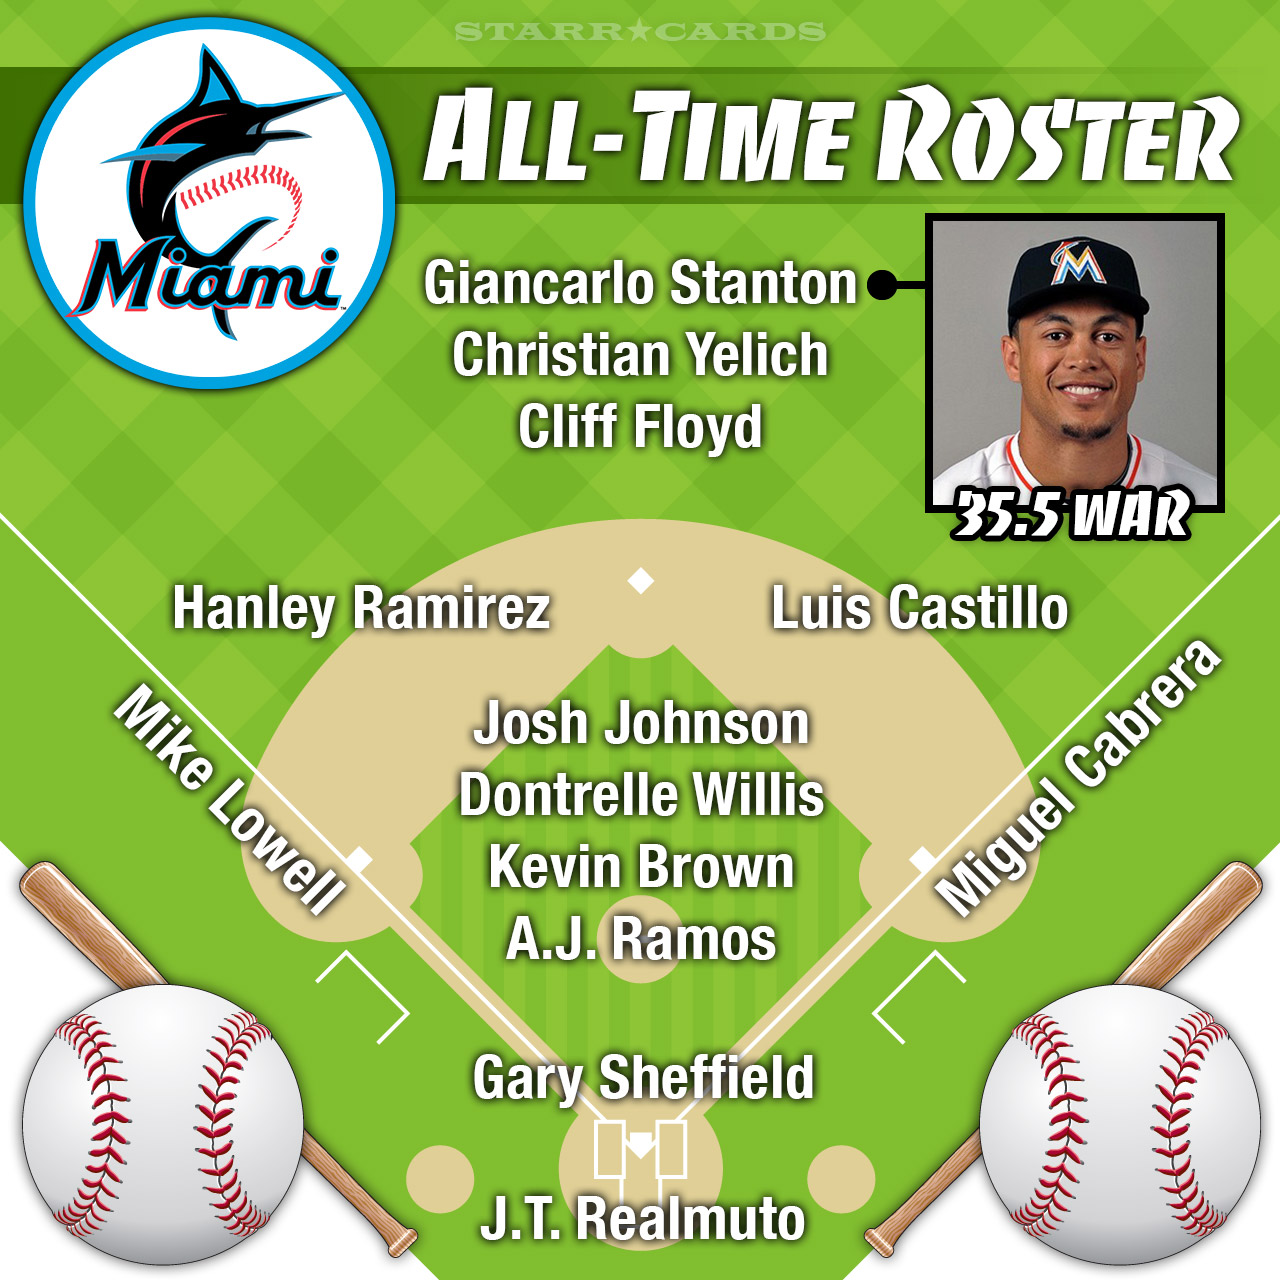 miami marlins players